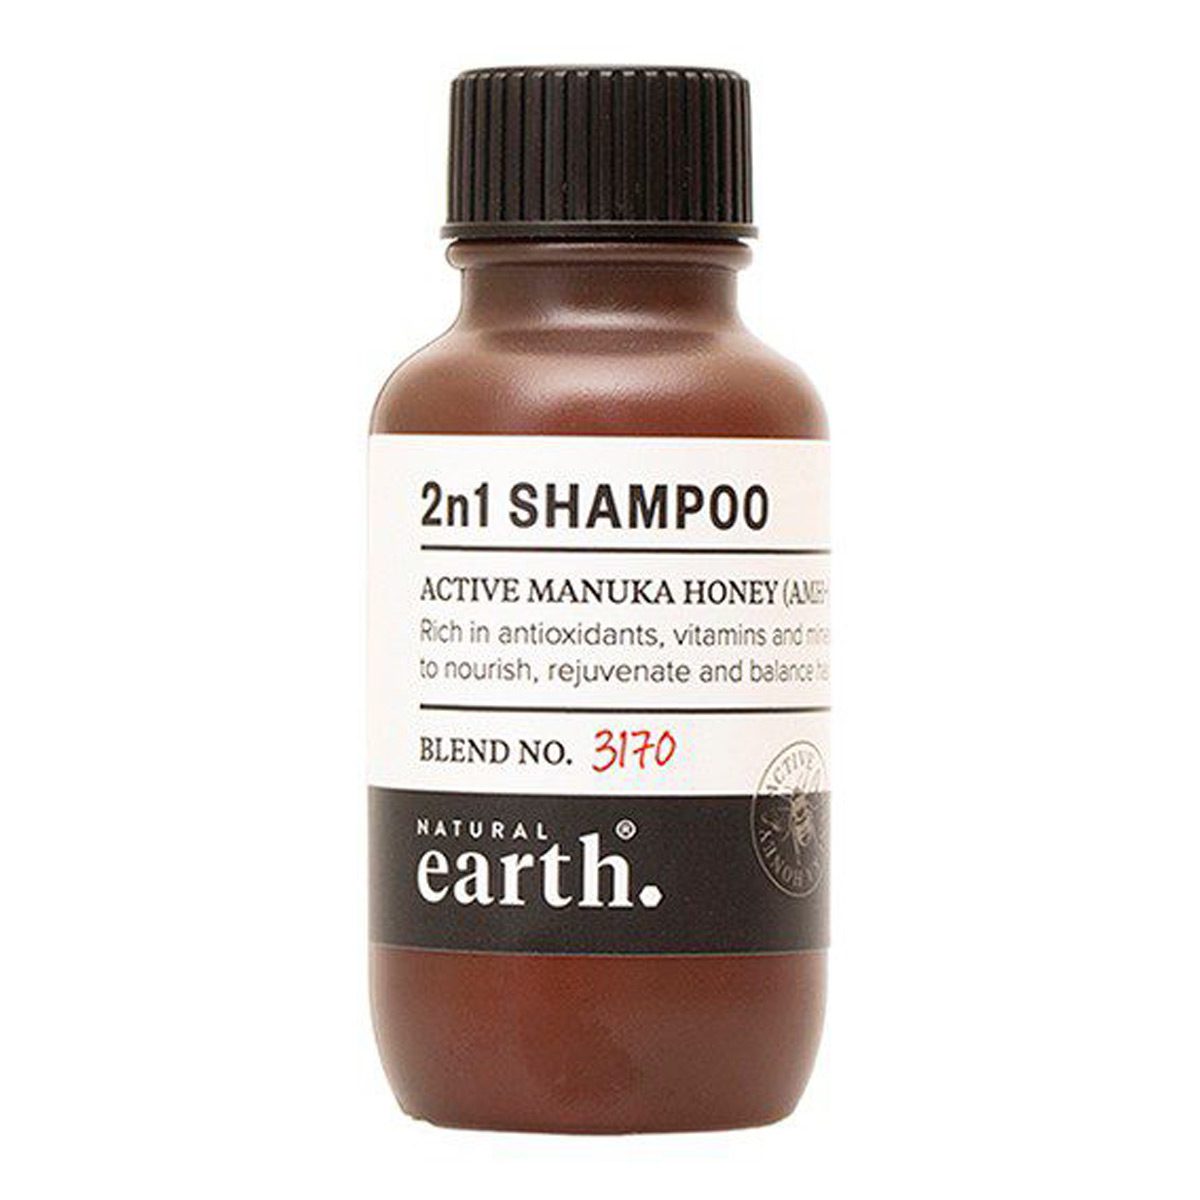 consumables-hospitality-guest-amenities-natural-earth-conditioning-shampoo-bottles-35ml-x-324-enriched-with-amh-manuka-honey-soften-moisturise-hair-salon-grade-conditioner-vjs-distributors-NEARTHCSB